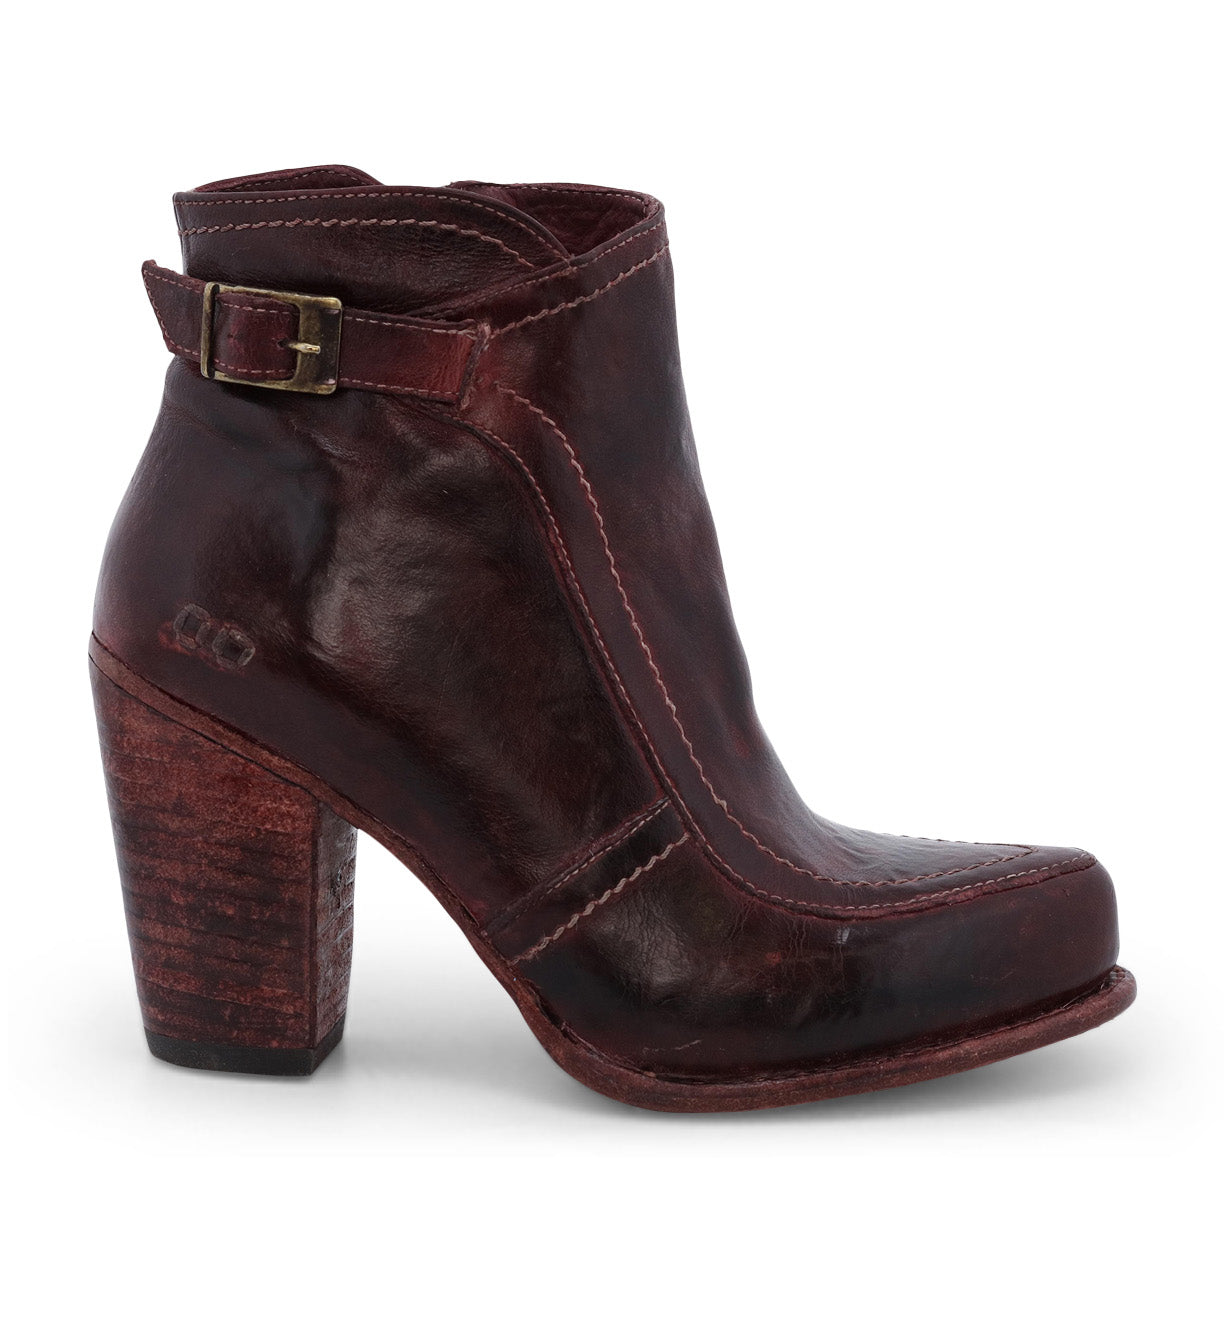 A women's Isla burgundy leather ankle boot with a wooden heel, by Bed Stu.